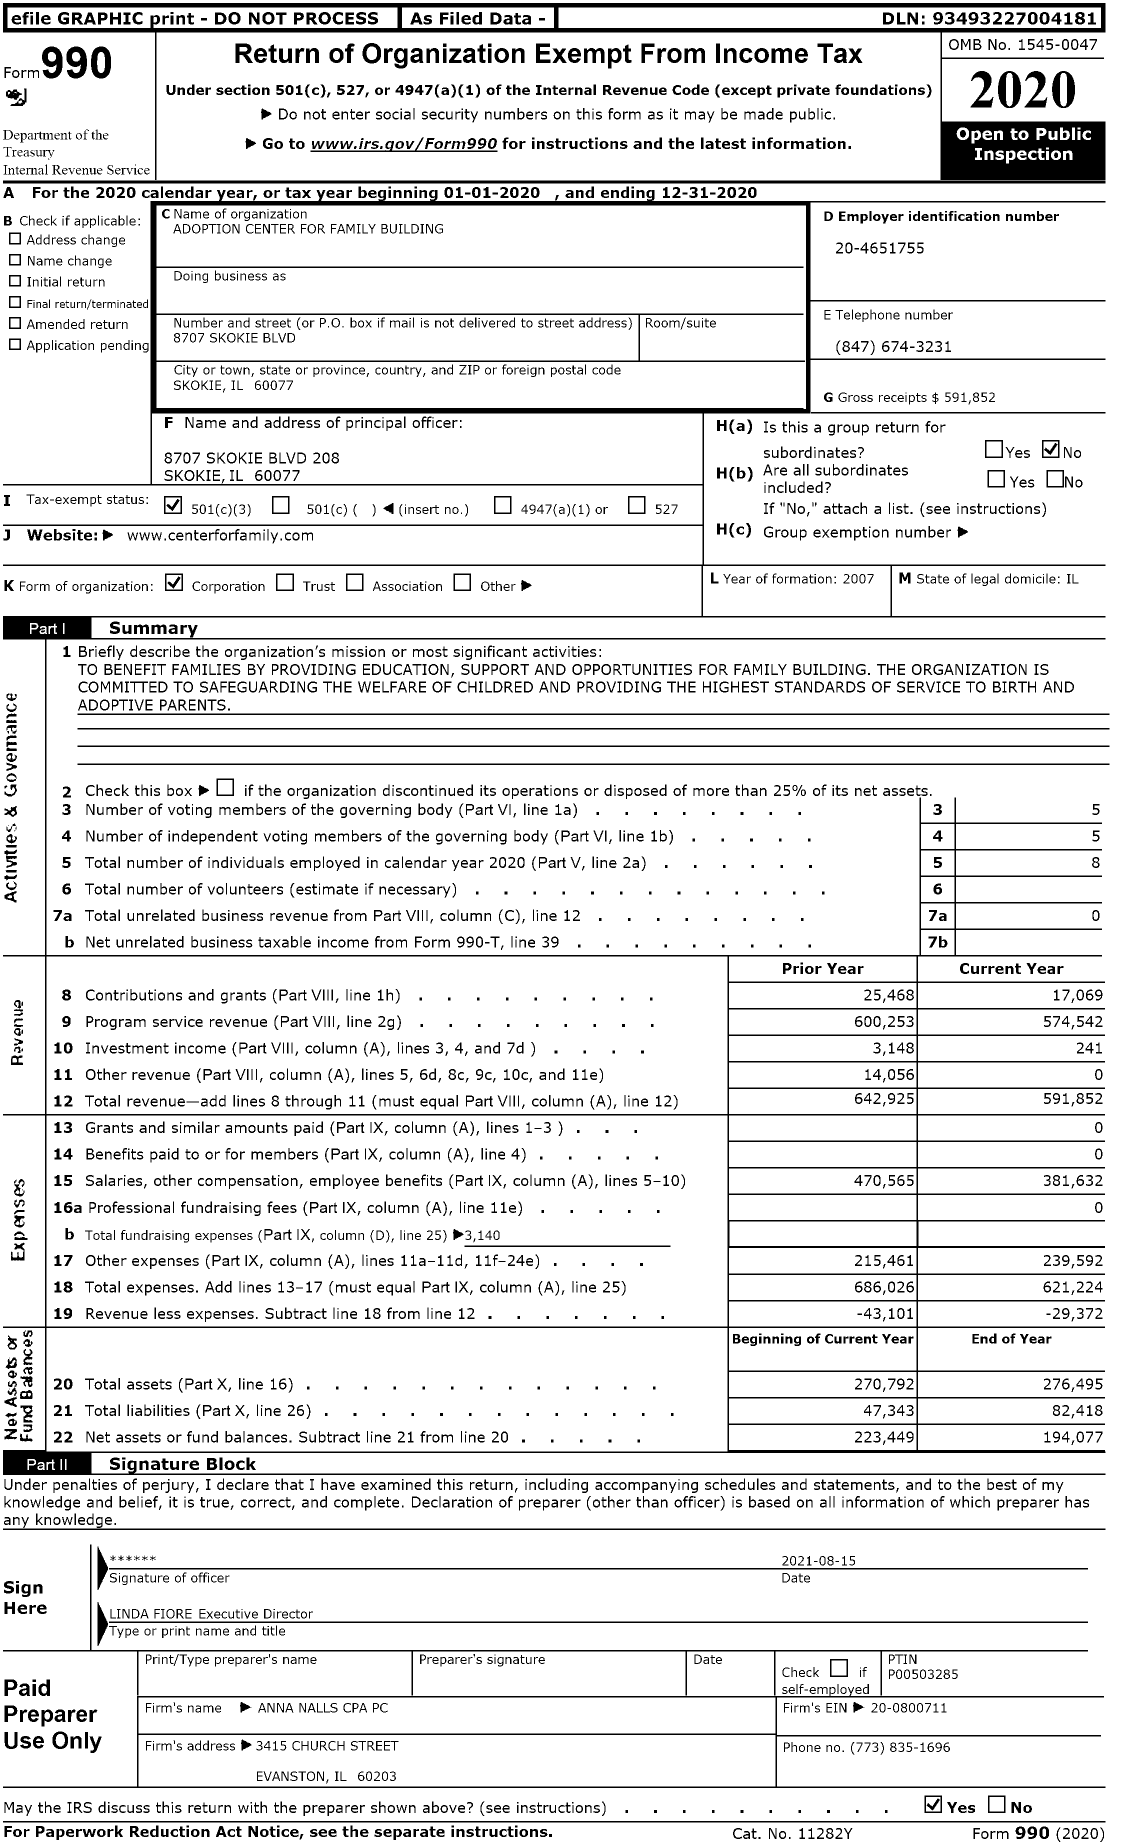 Image of first page of 2020 Form 990 for Adoption Center for Family Building